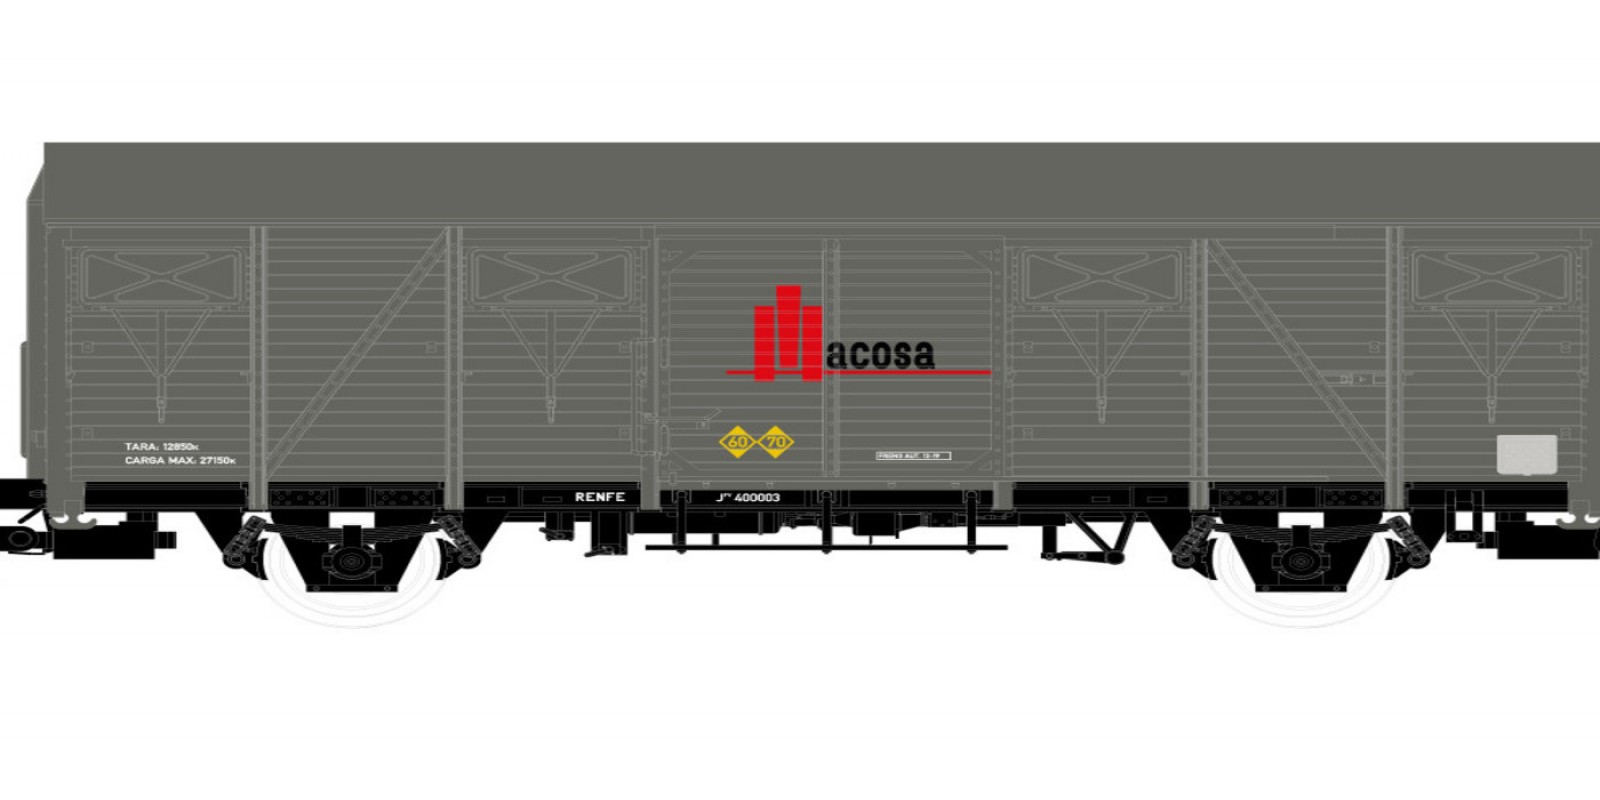 ET19046 2-axle wagon ORE, with wooden walls, "Macosa" livery, period III